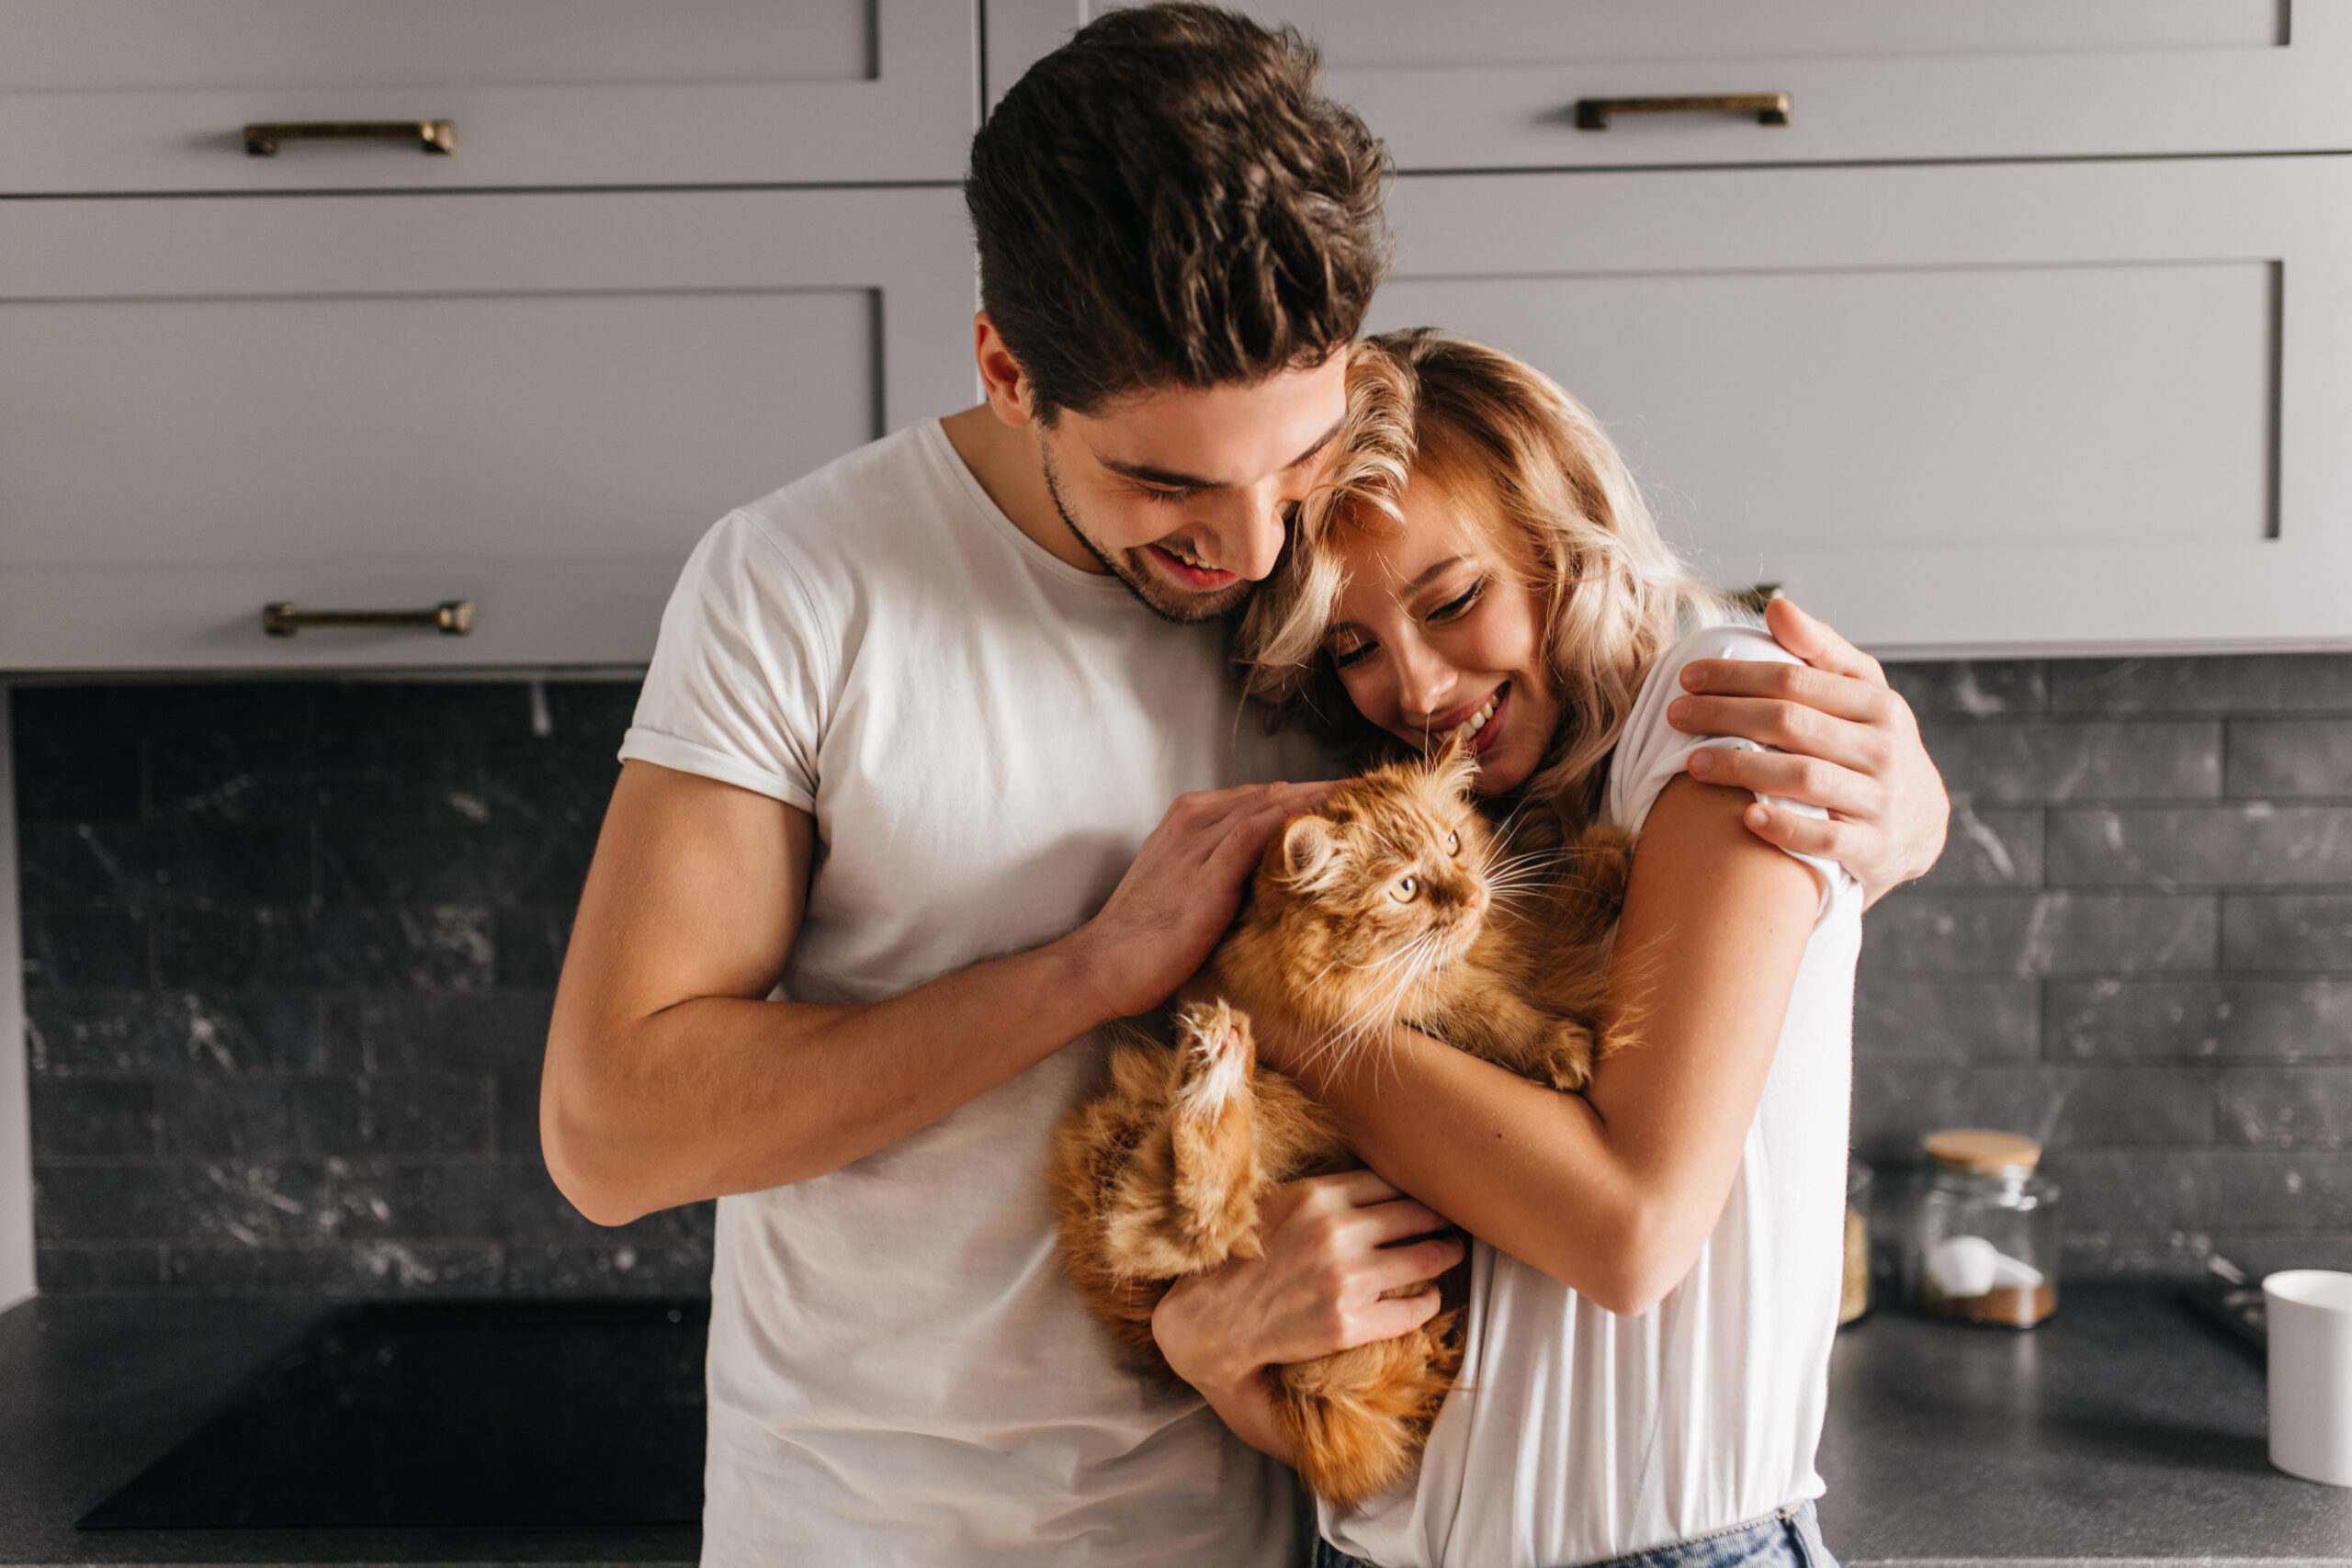 Brunette man looking at his cat and embracing wife. Indoor photo of happy family posing with pet.